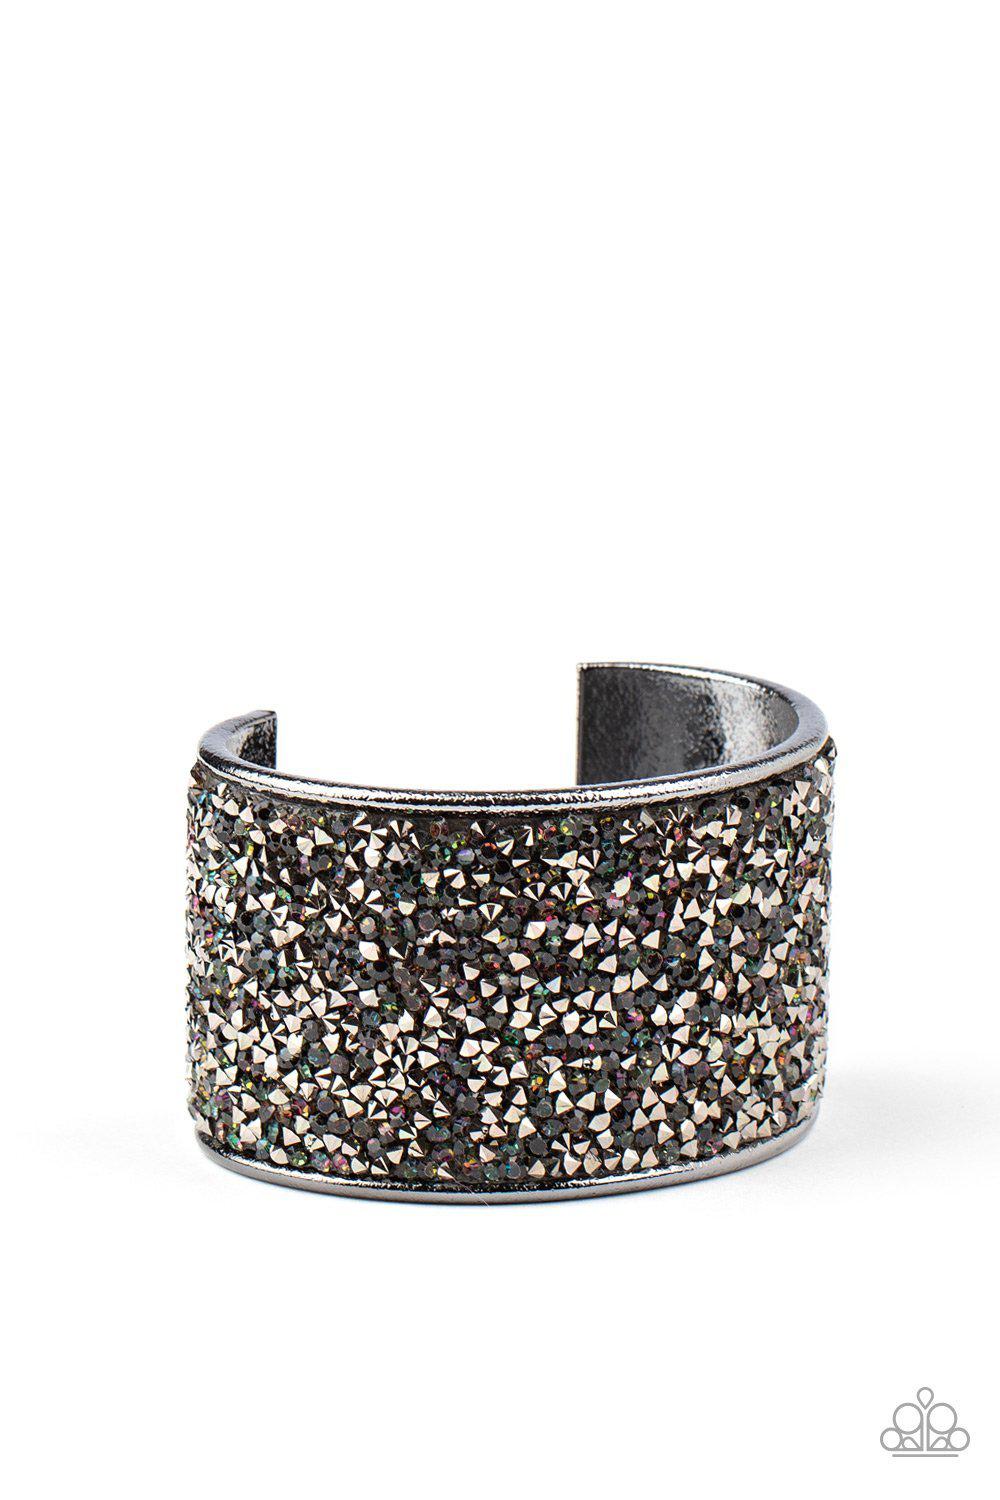 Stellar Radiance Multi Iridescent and Hematite Rhinestone Cuff Bracelet - Paparazzi Accessories Life of the Party Exclusive October 2020-CarasShop.com - $5 Jewelry by Cara Jewels